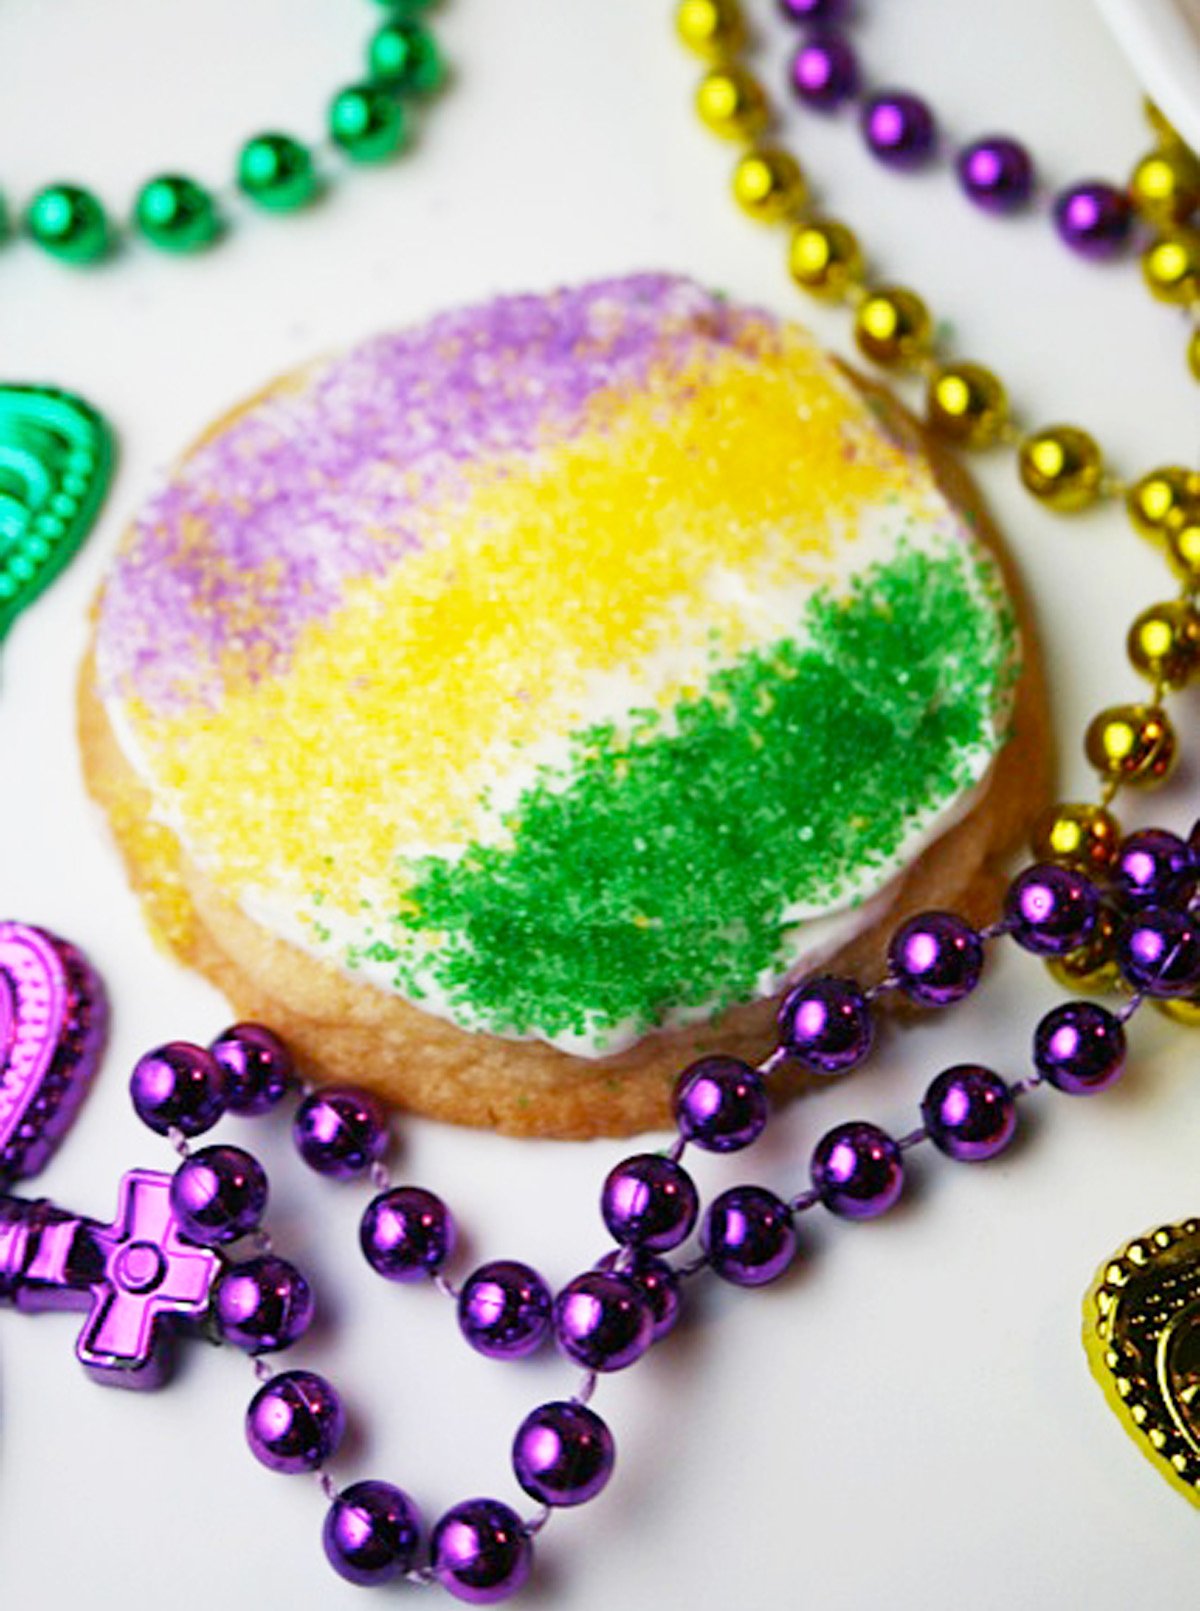 Sugar cookies with purple, green and yellow sprinkles.